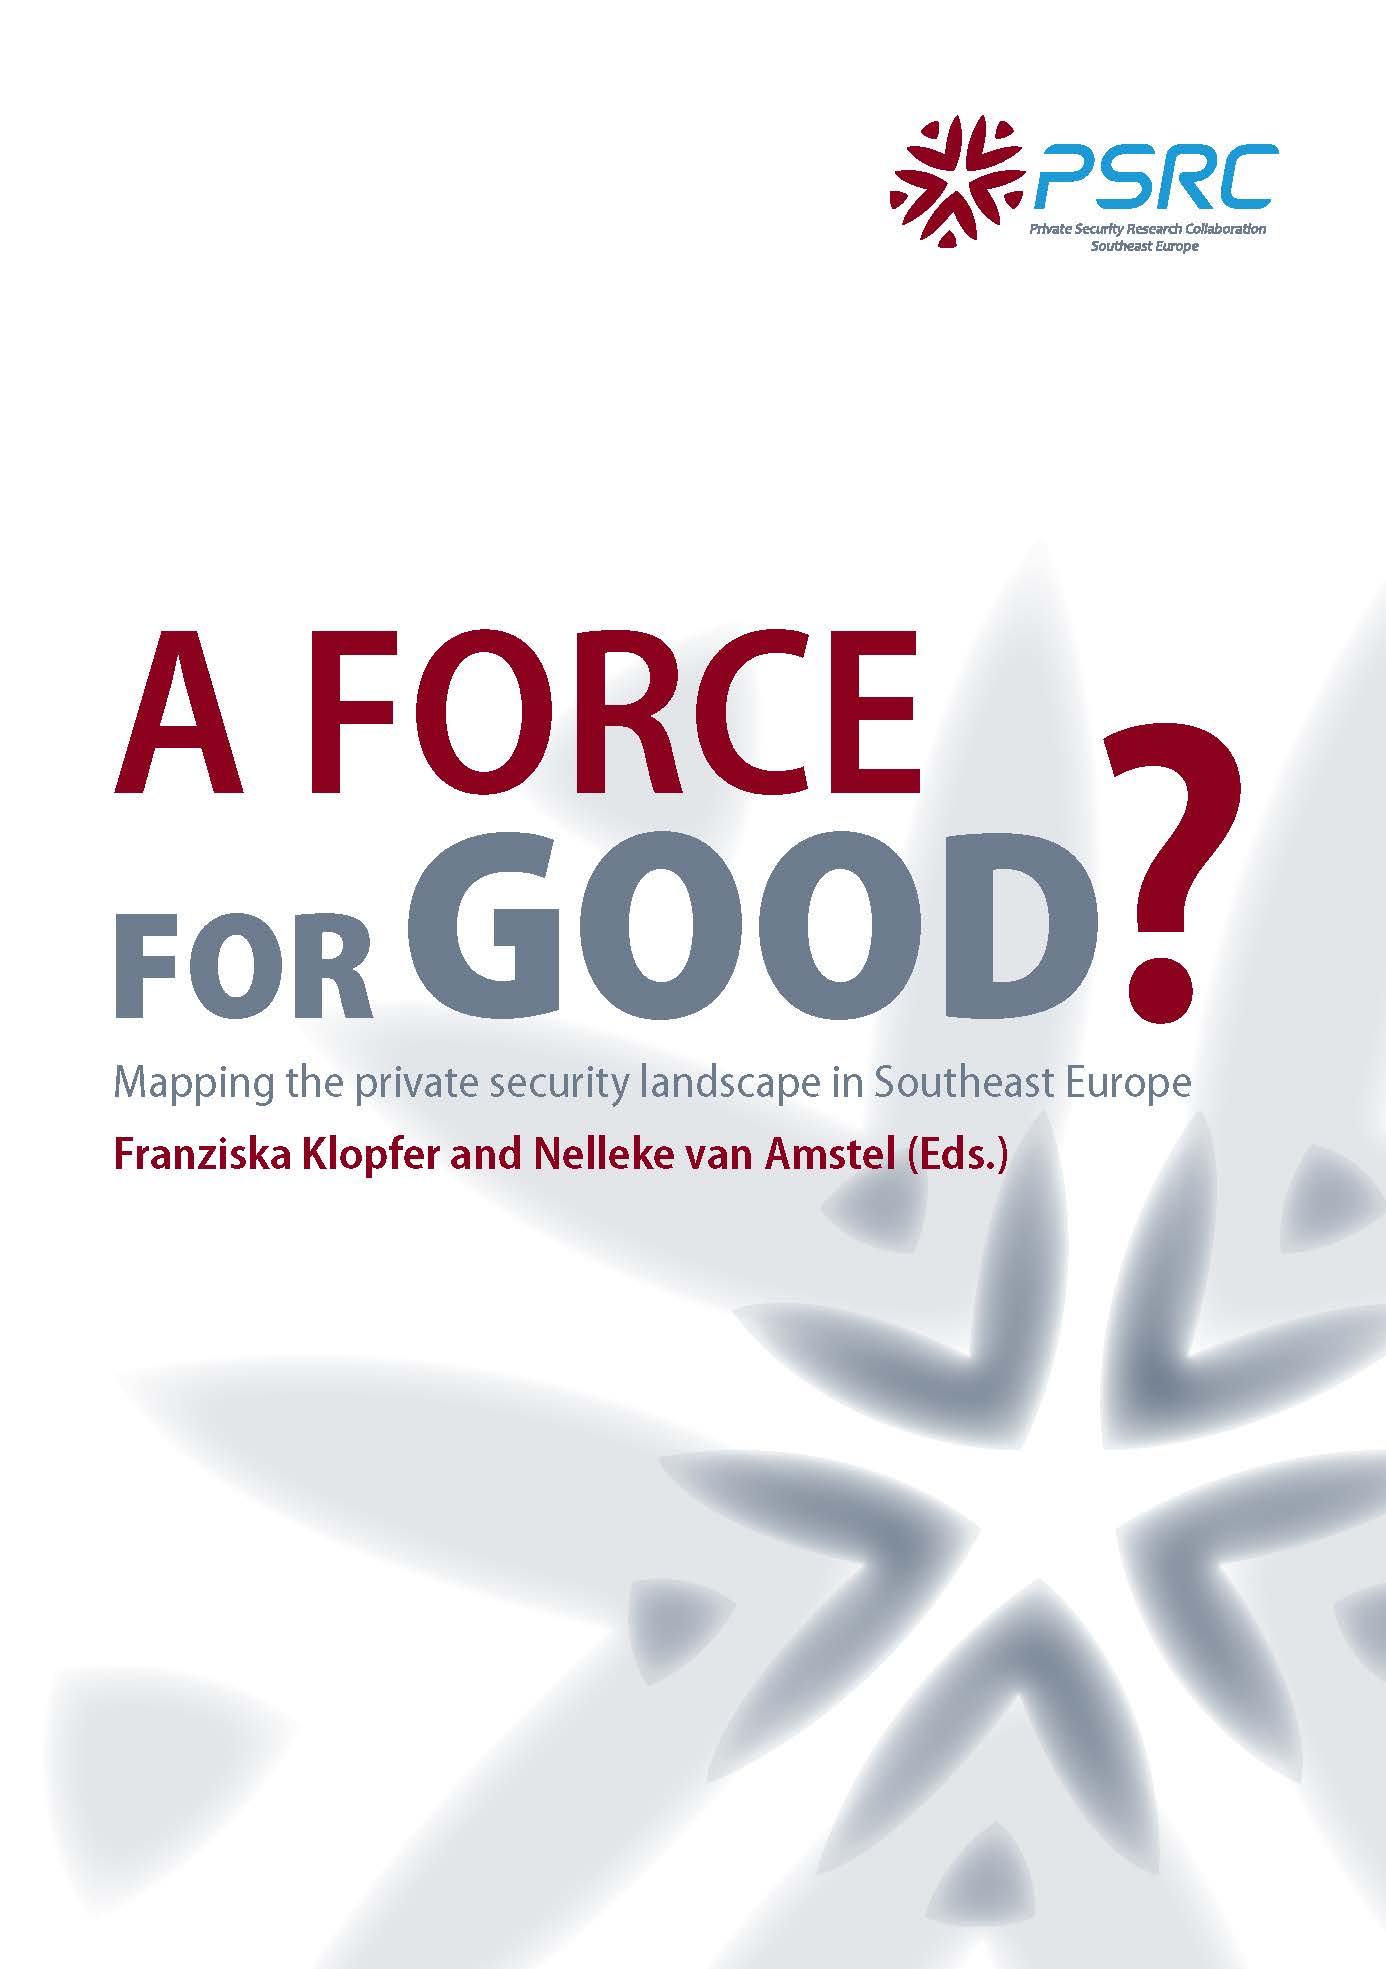 A Force for Good? Mapping the Private Security Landscape in Southeast Europe